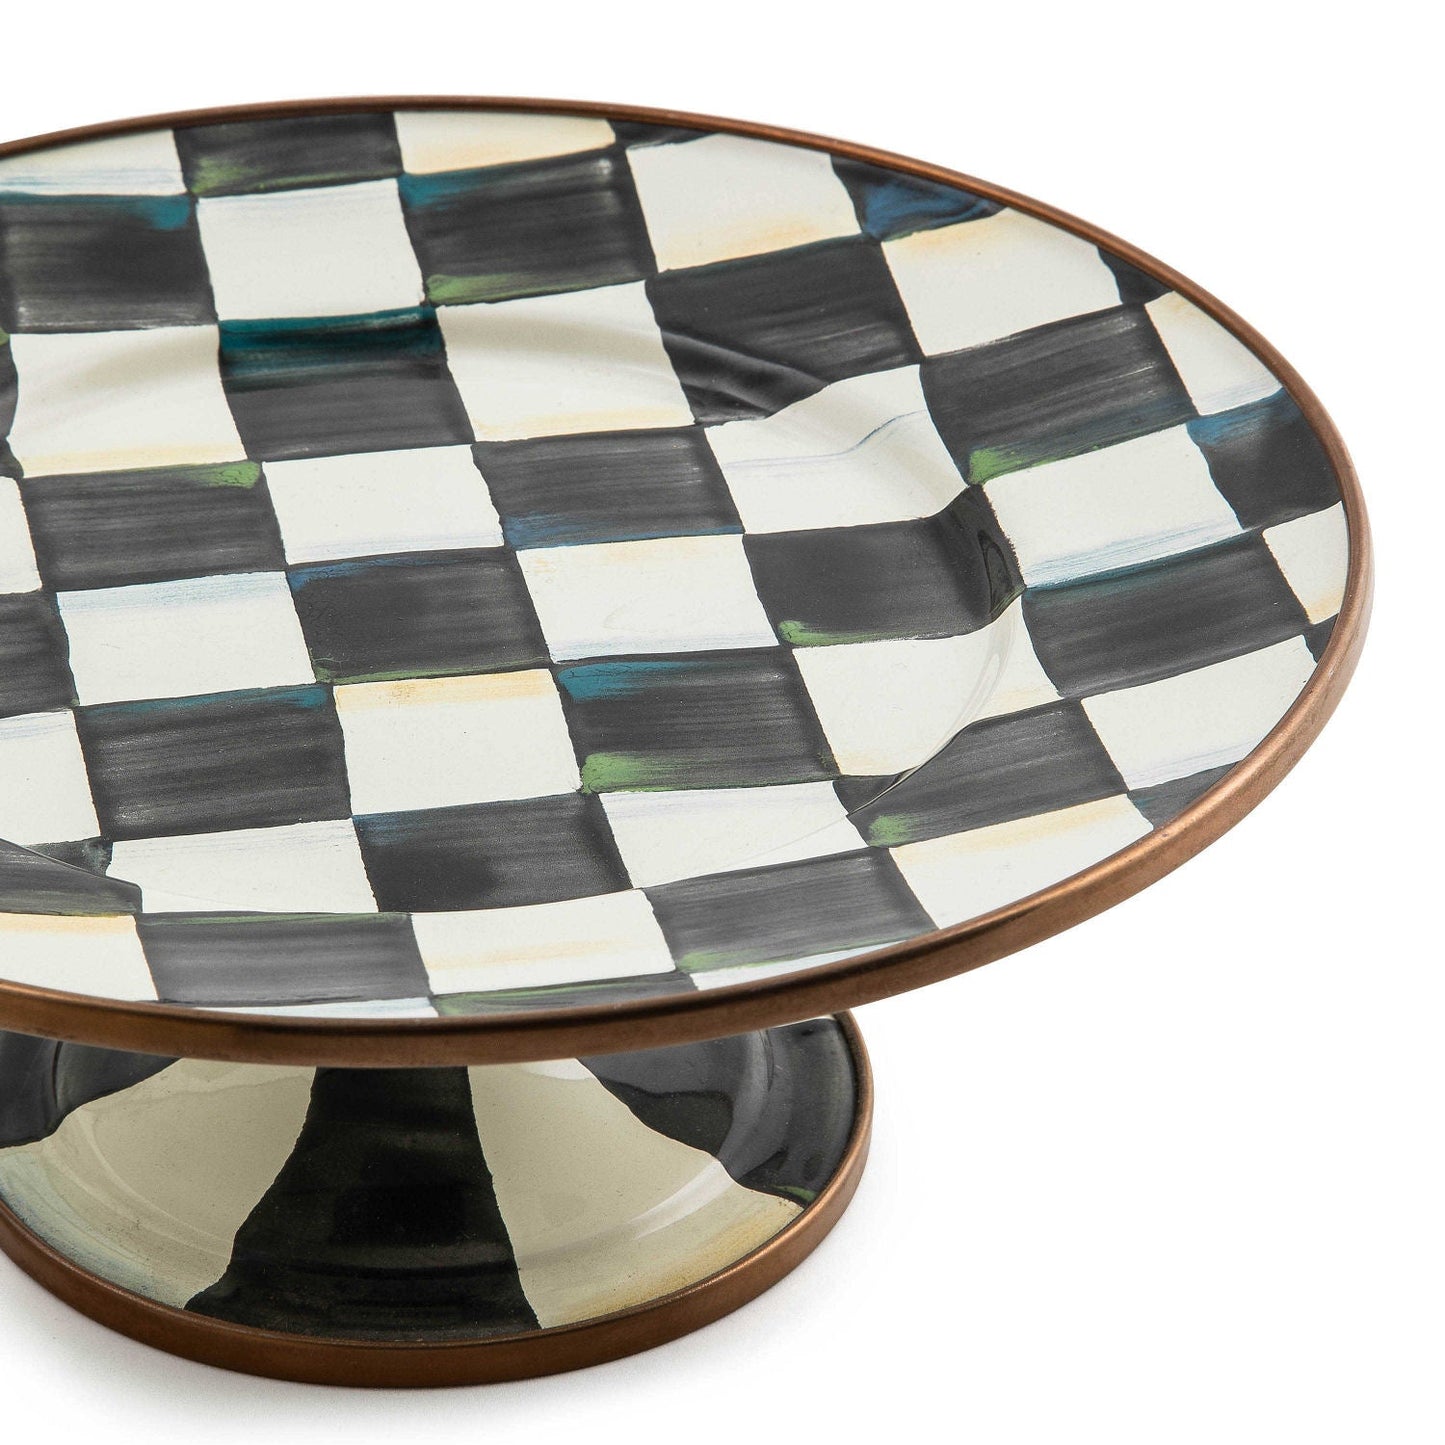 Courtly Check Mini Pedestal Platter by Mackenzie - Childs - |VESIMI Design| Luxury Bathrooms and Home Decor